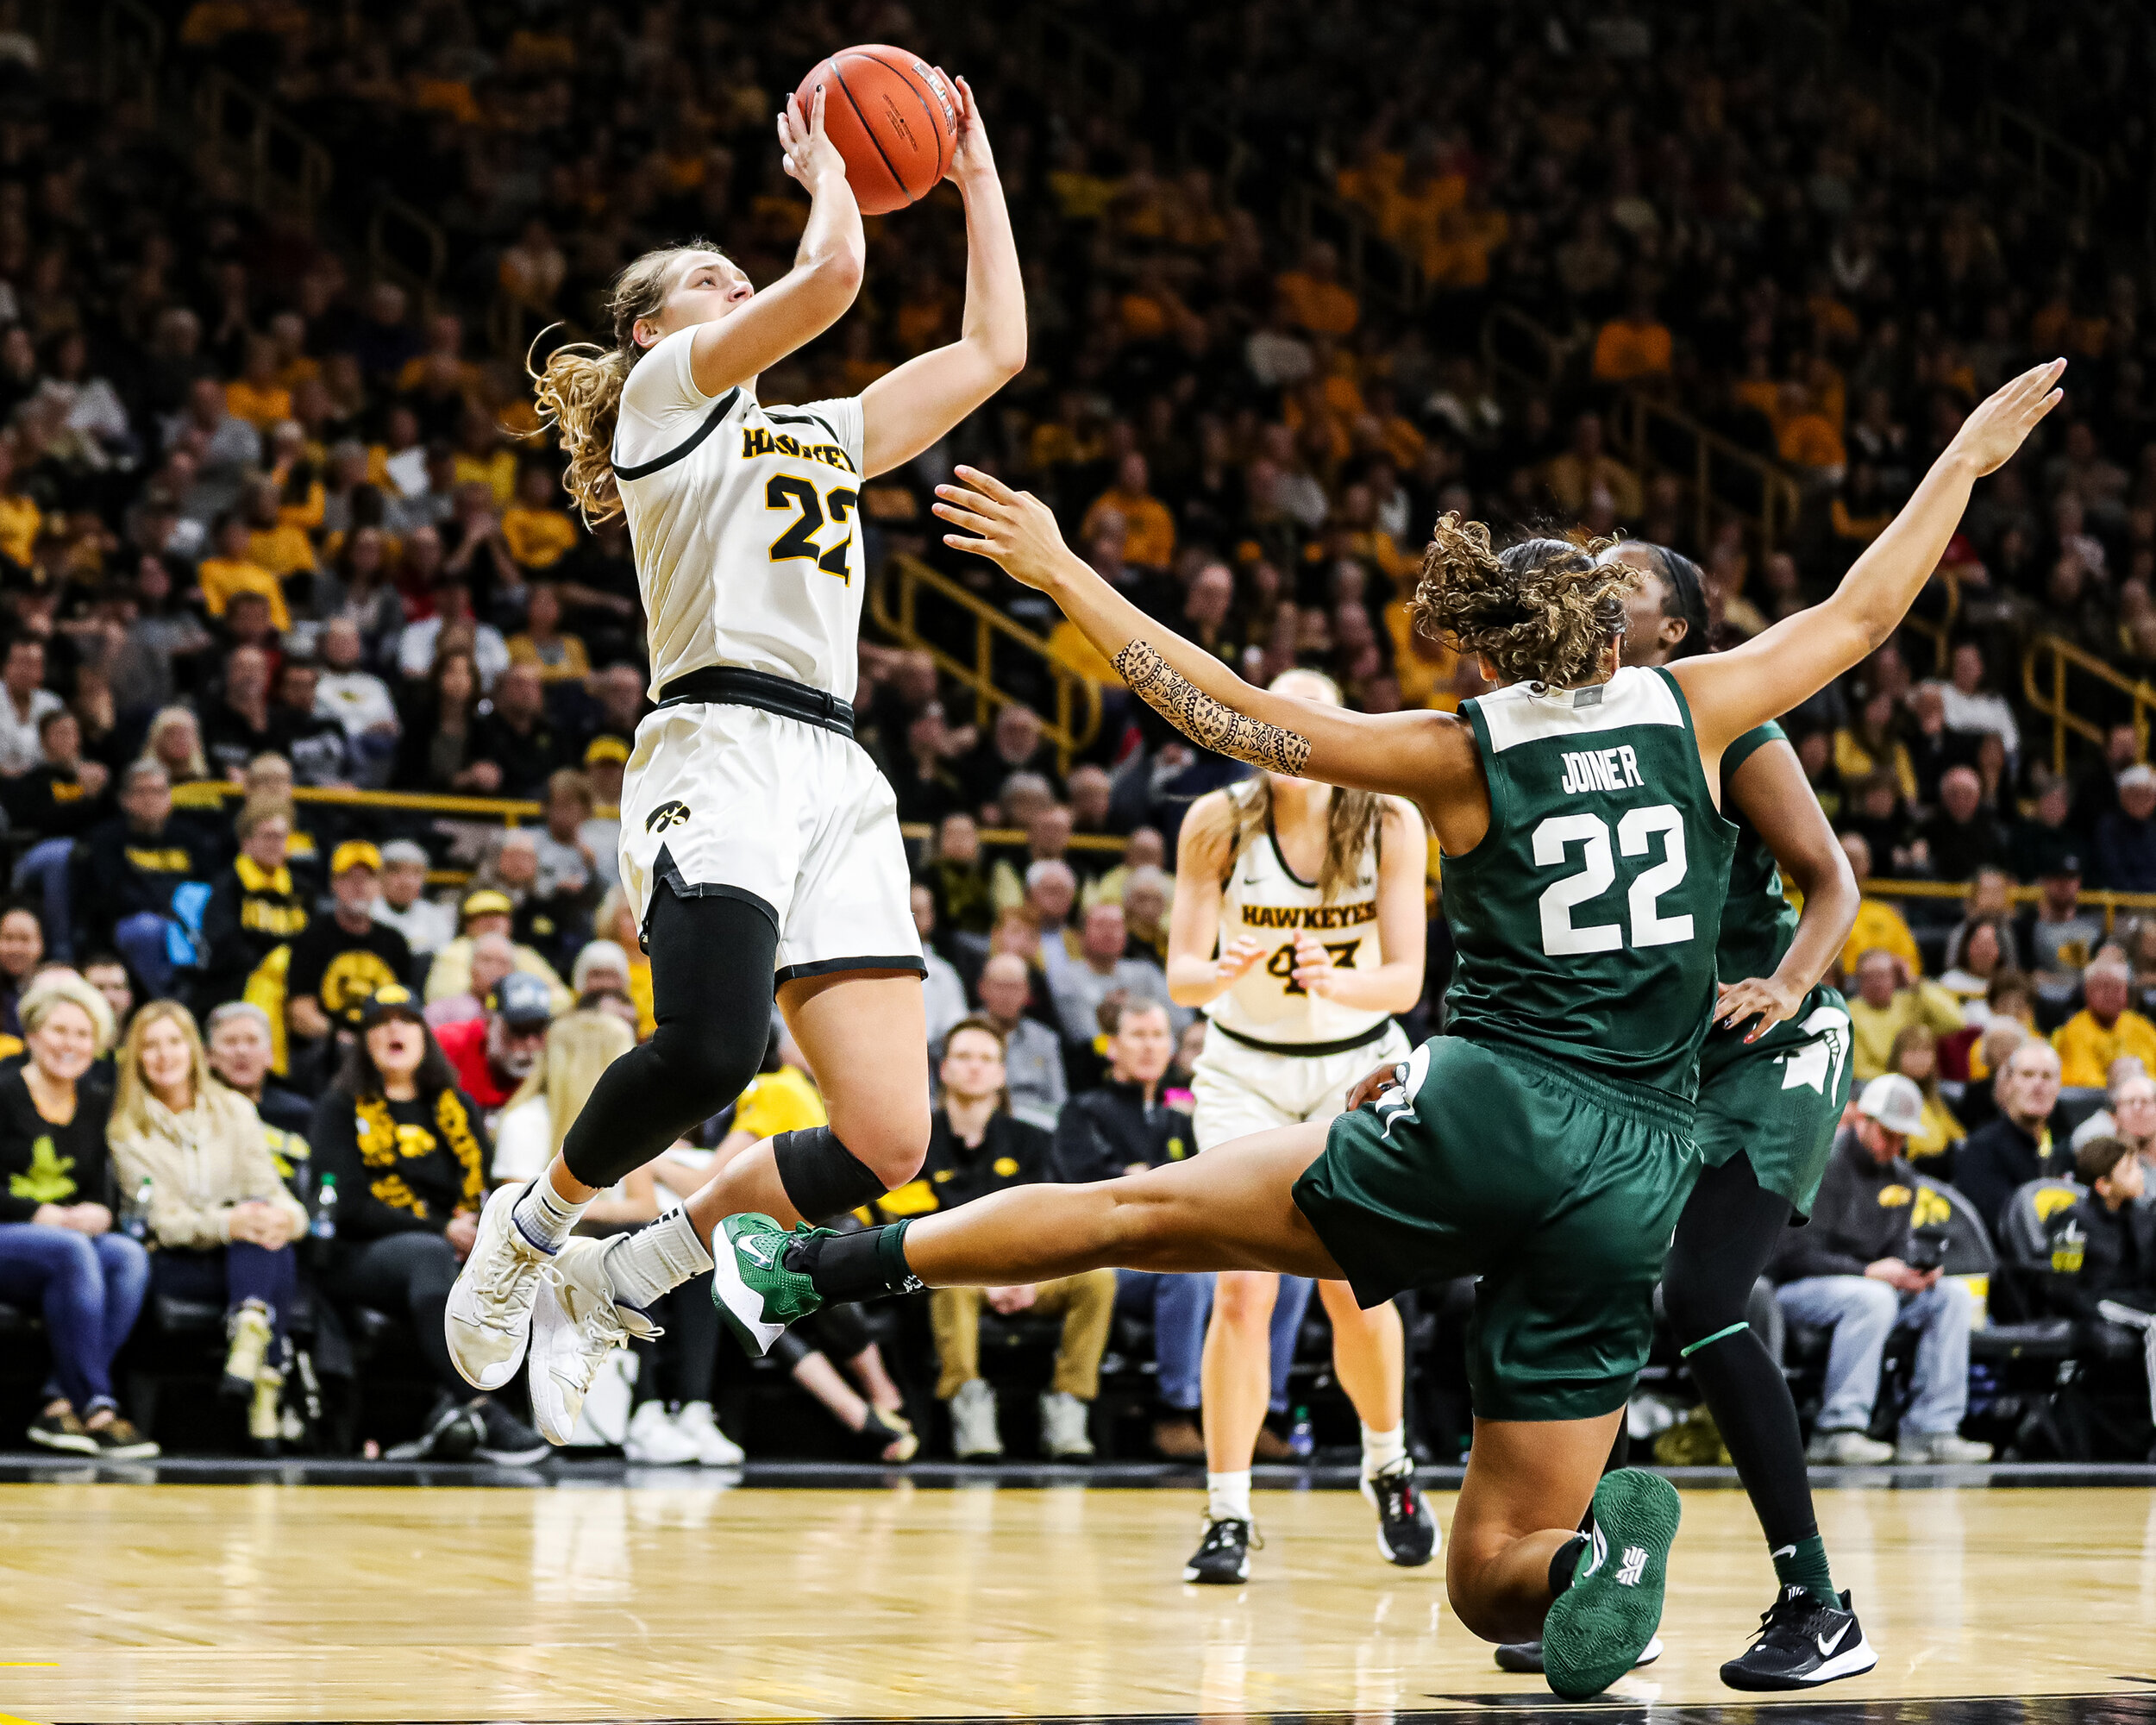  Iowa guard Kathleen Doyle (22) sends Michigan State guard Moira Joiner (22) flying backwards as Doyle launches a shot during a basketball game against Michigan State University at Carver-Hawkeye Arena in Iowa City, on Sunday, Jan 26, 2020.  